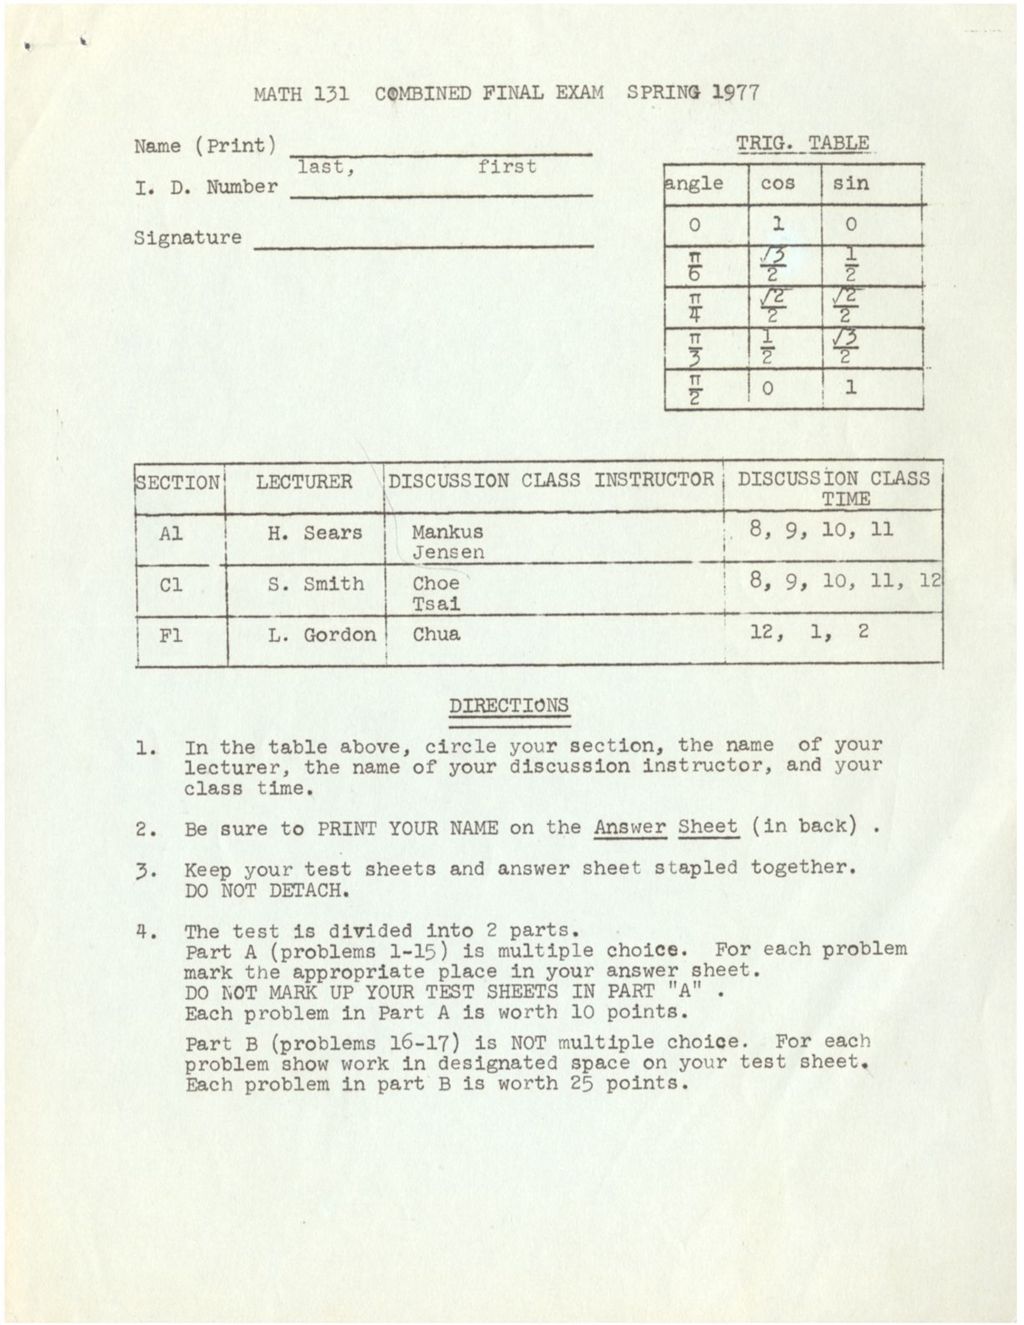 Math 131 Combined Final Exam Spring 1977